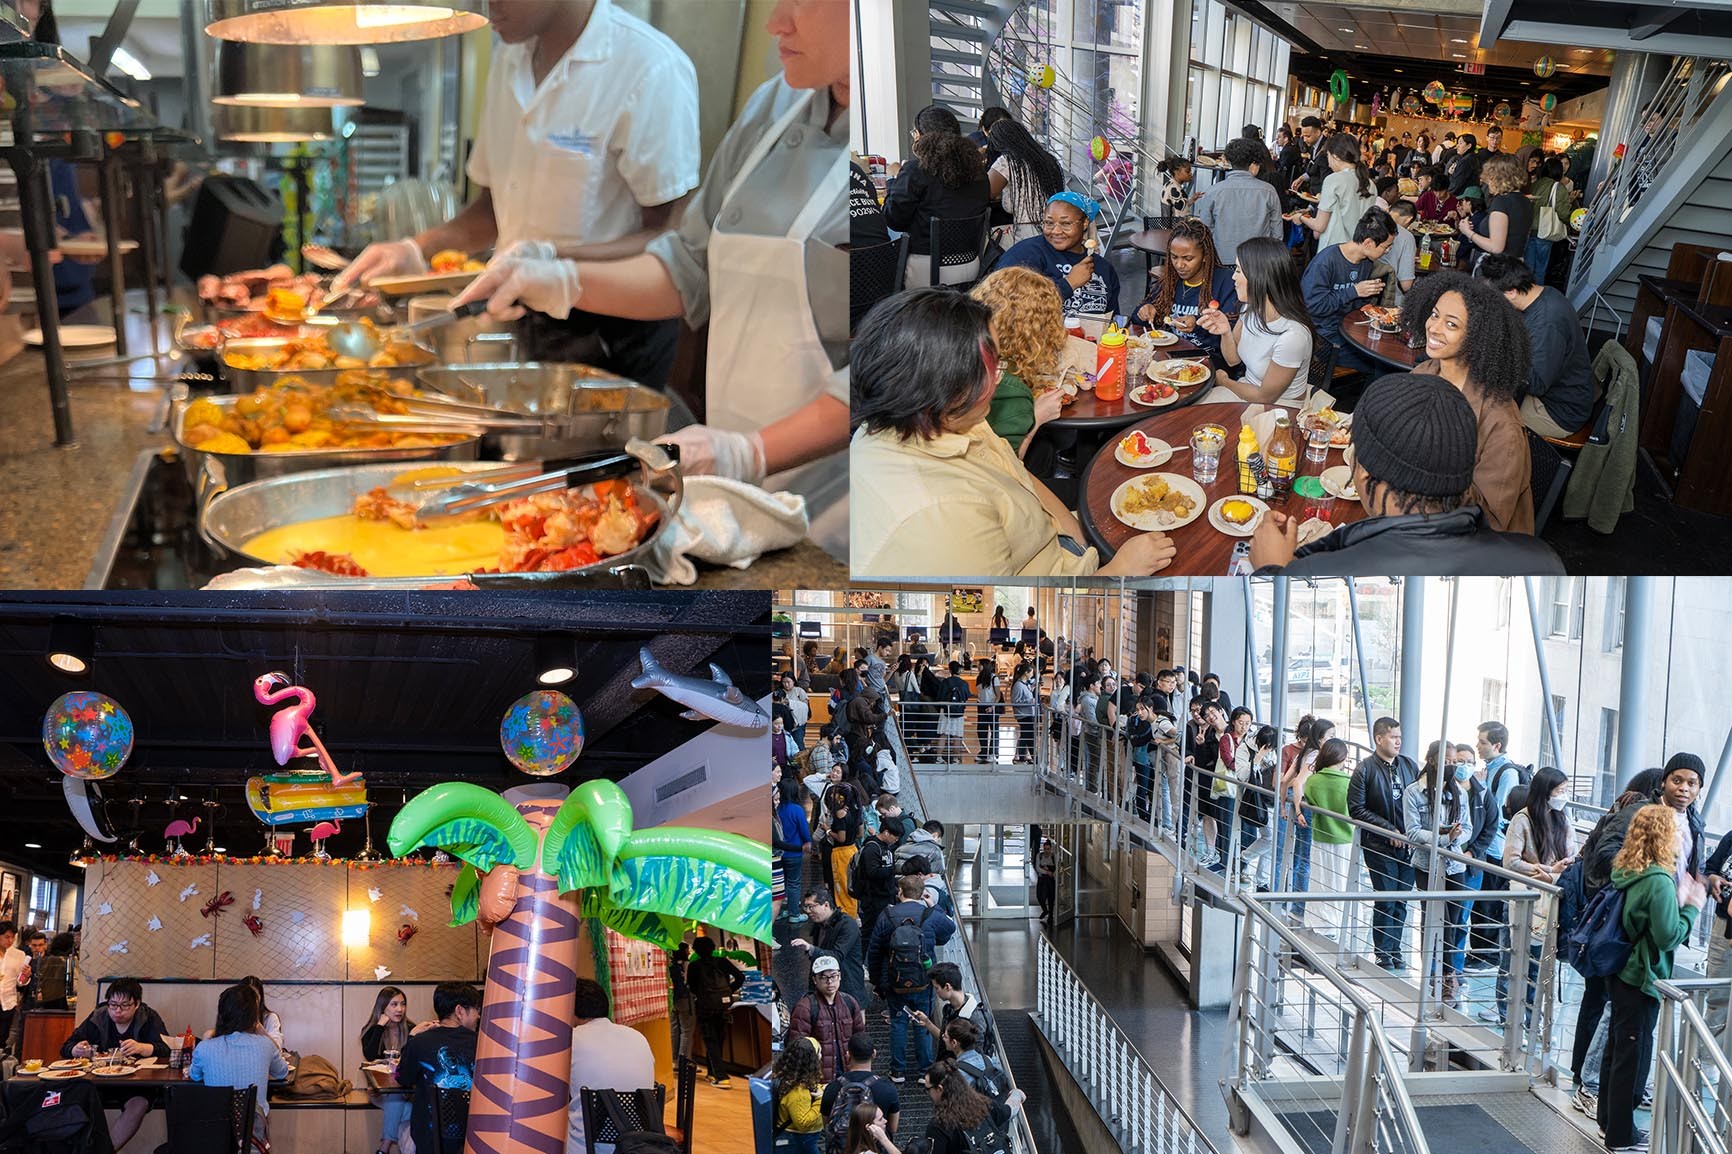 4 photo collage: top left, surf and turf served by amazing Columbia staff, bottom left dining hall in Lerner decorated with inflatable flamingos, sharks, and palm trees, top right students enjoying surf and turf in Lerner Hall, bottom right students lined up in Lerner Hall